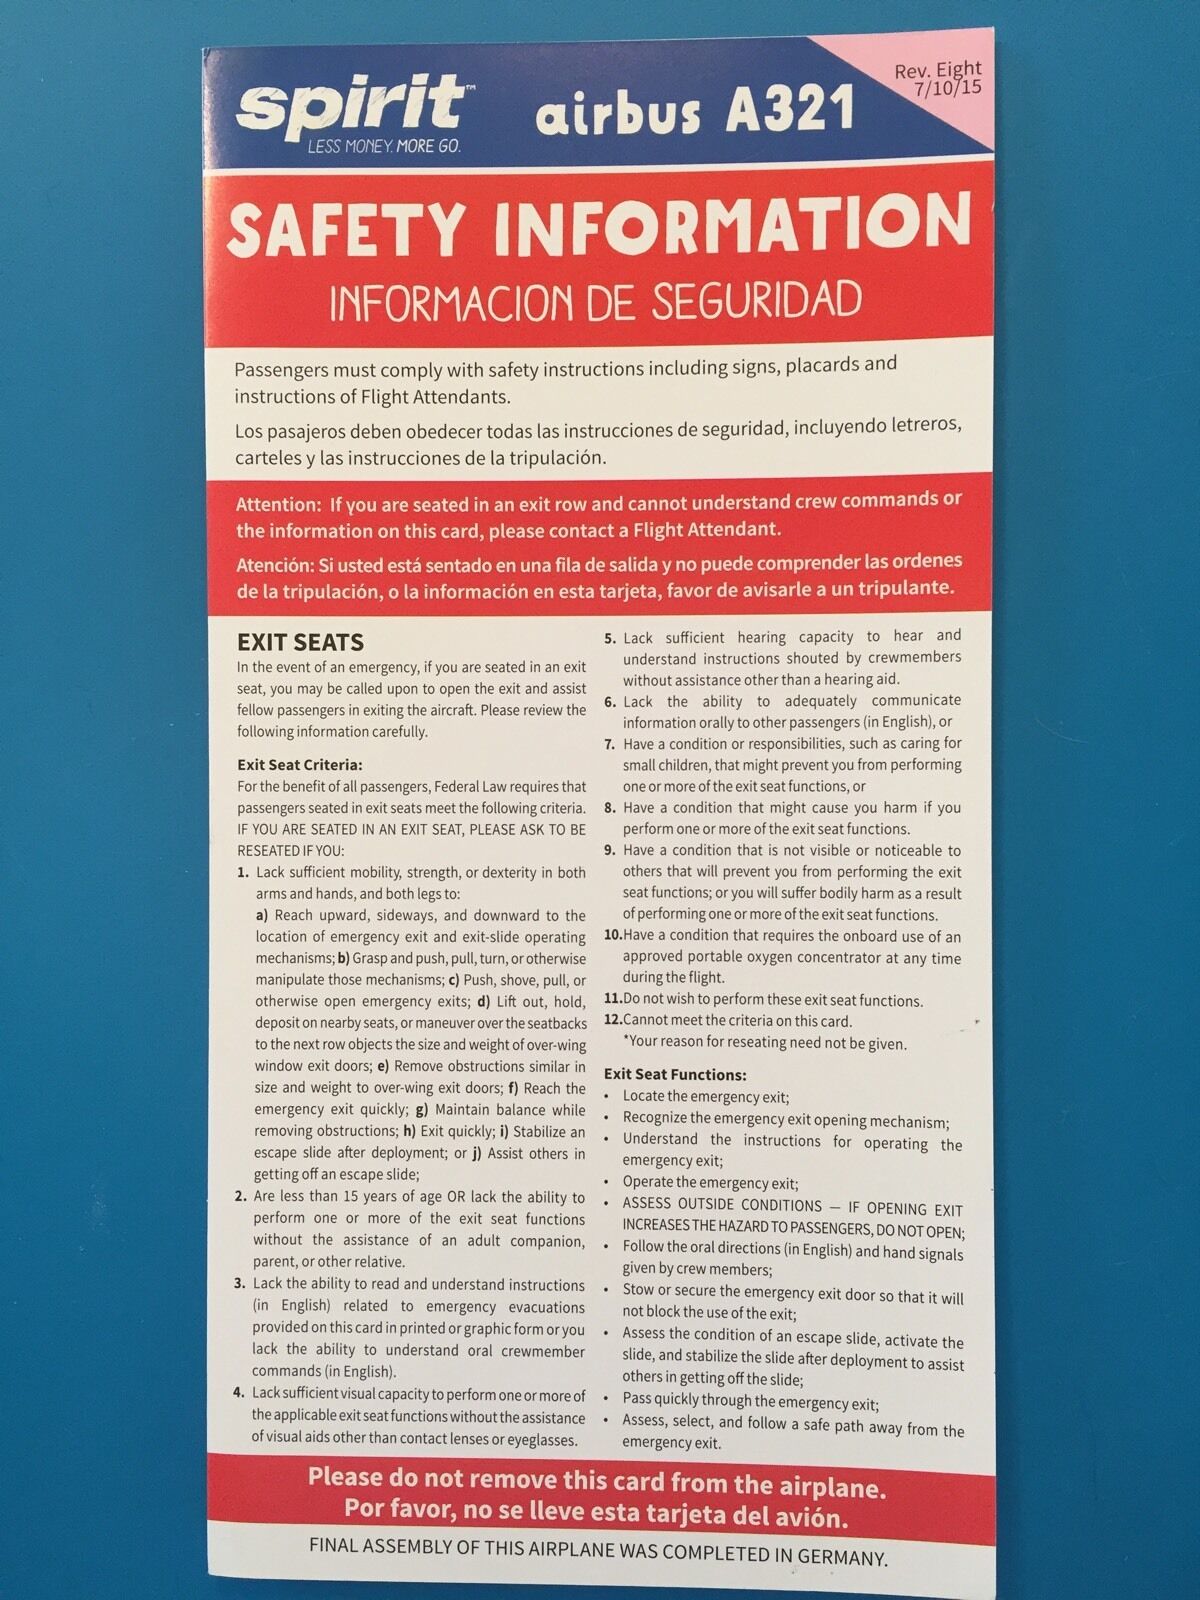 SPIRIT AIRLINES SAFETY CARD--AIRBUS 321 --2015 REV